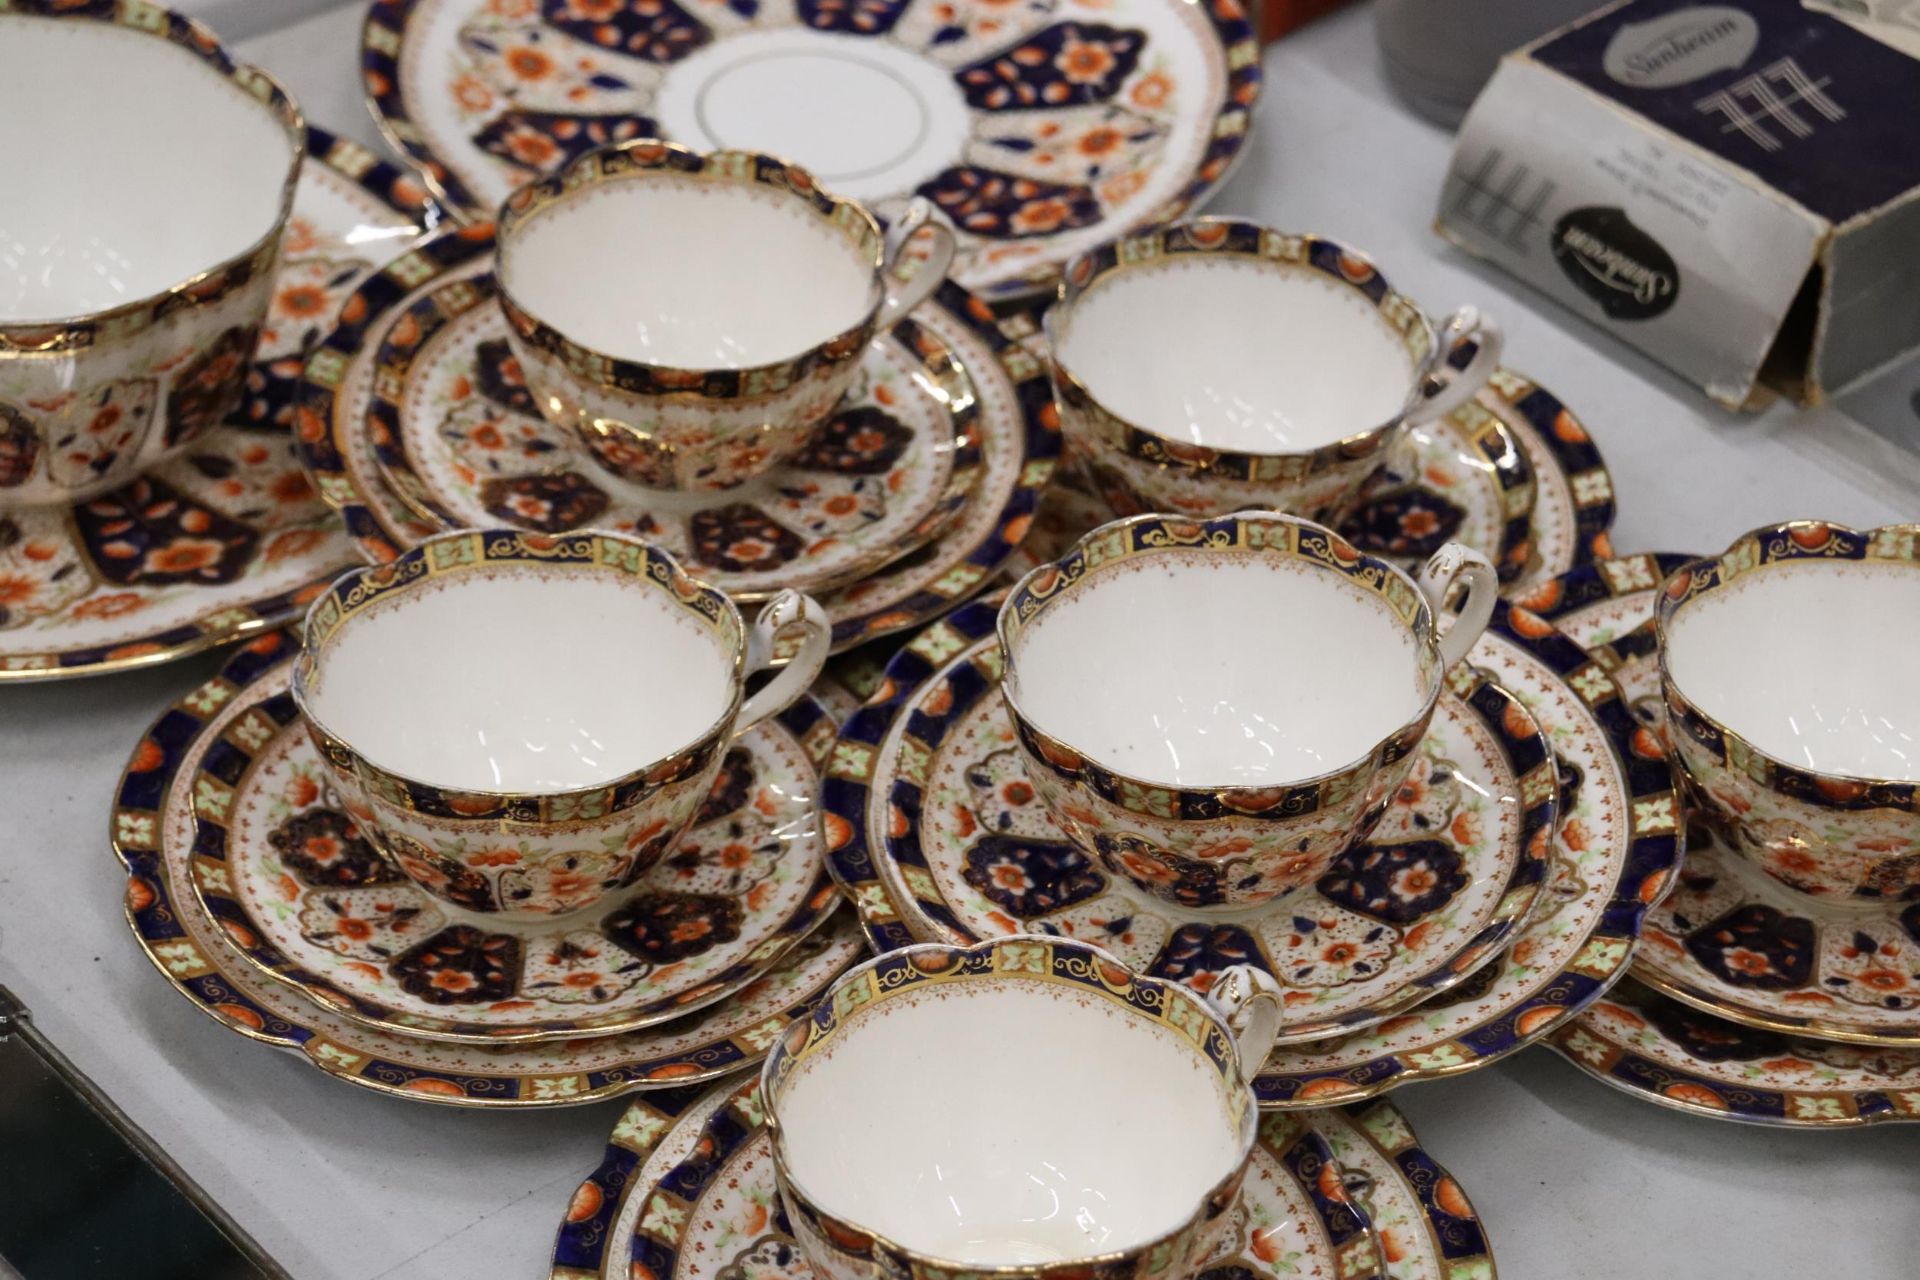 AN ANTIQUE 'COURT CHINA' TEASET TO INCLUDE CAKE PLATES, CUPS, SAUCERS, SIDE PLATES AND A SUGAR BOWL - Bild 8 aus 9